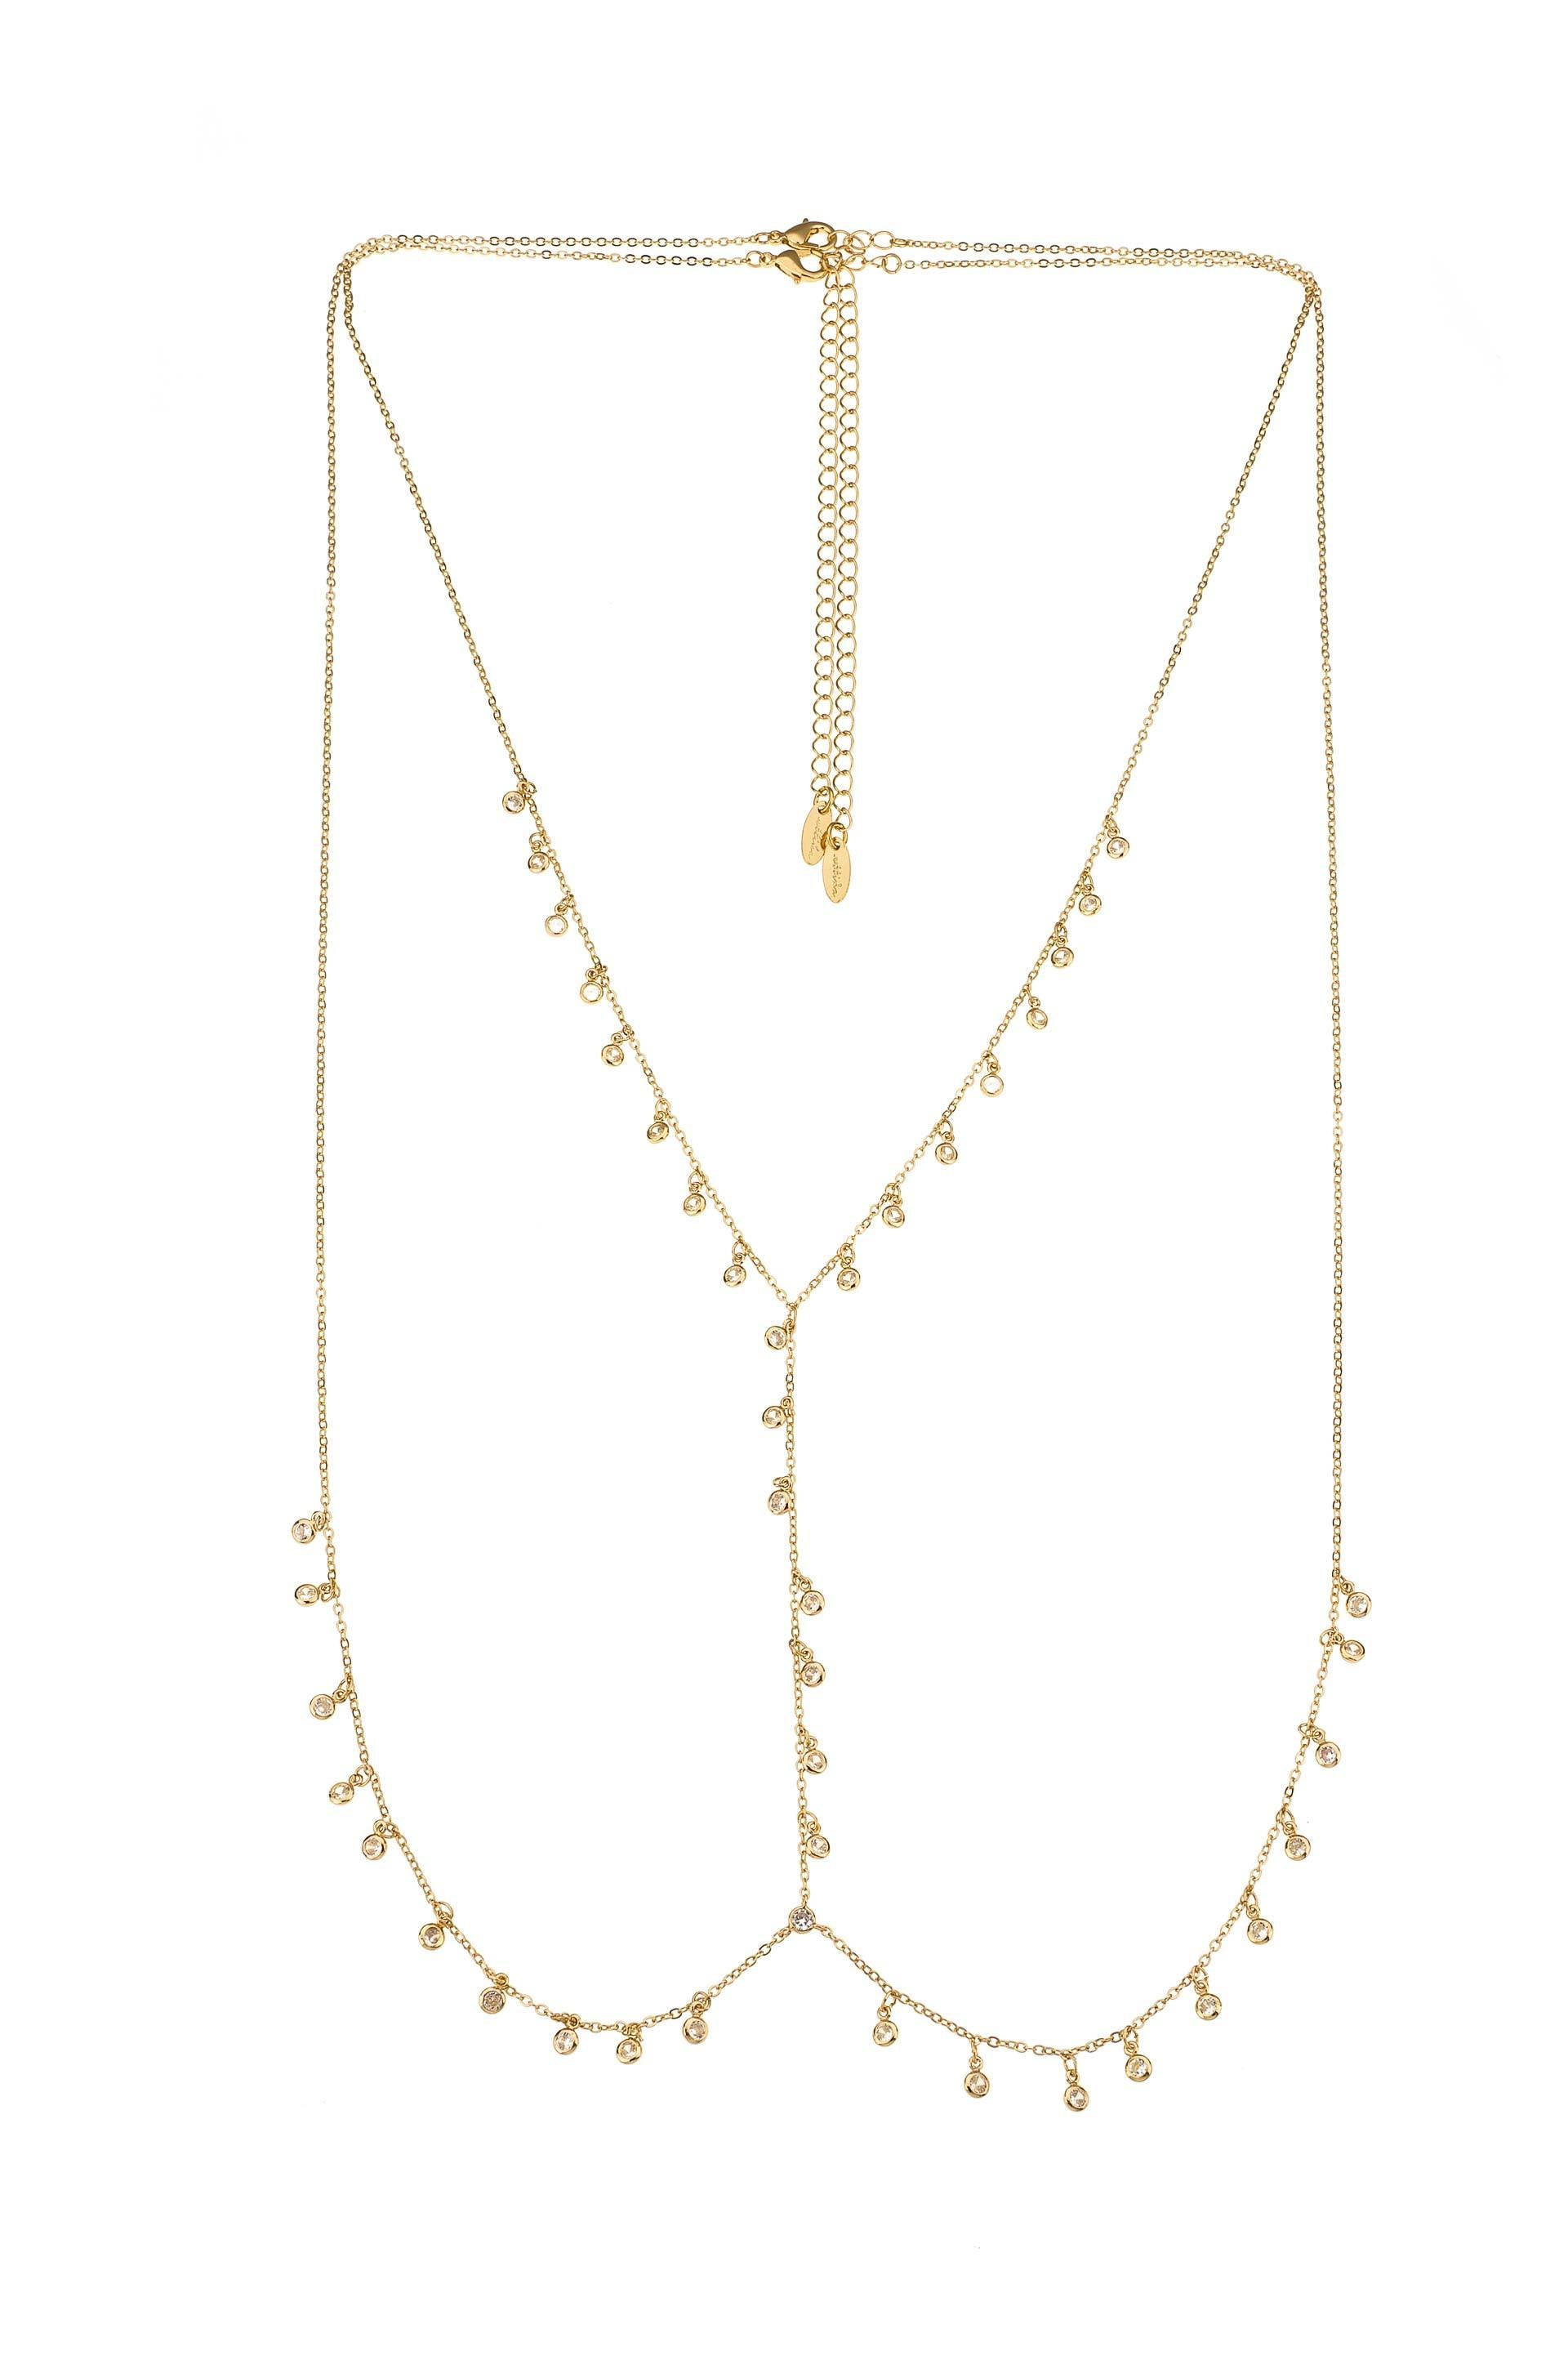 Crystal Fringe Body Chain in Gold on white